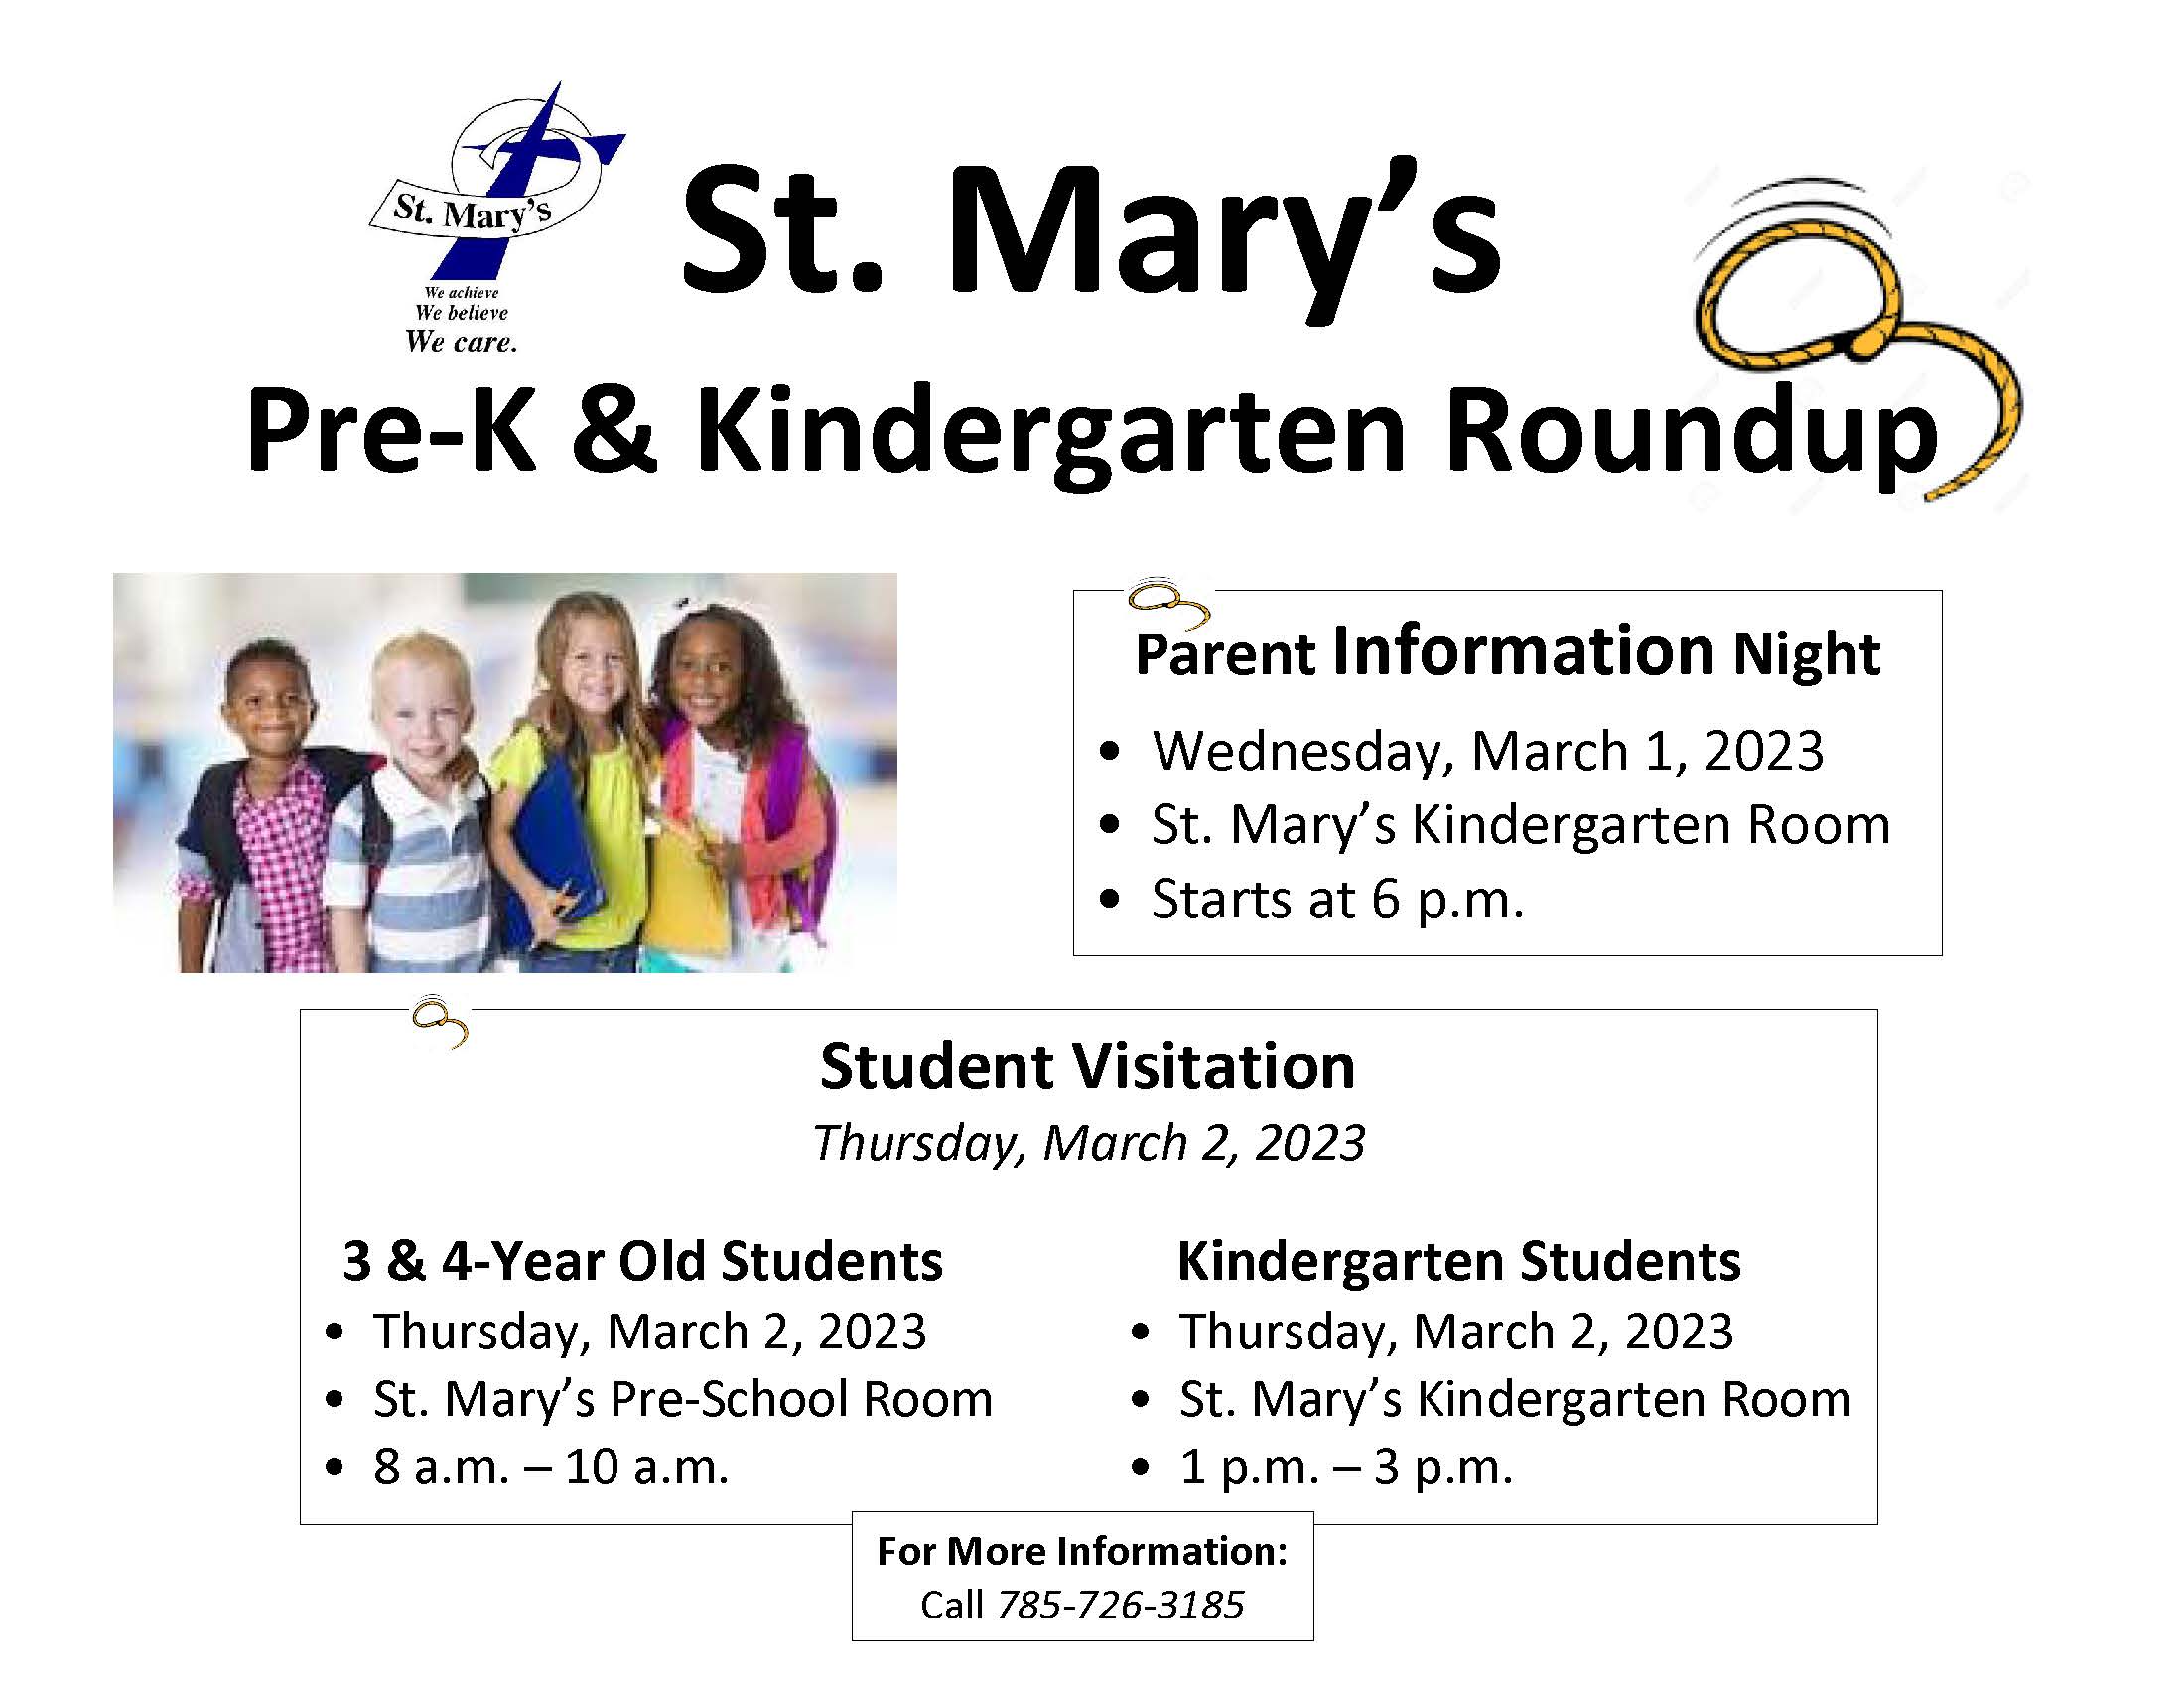 St. Mary's Roundup Flyer